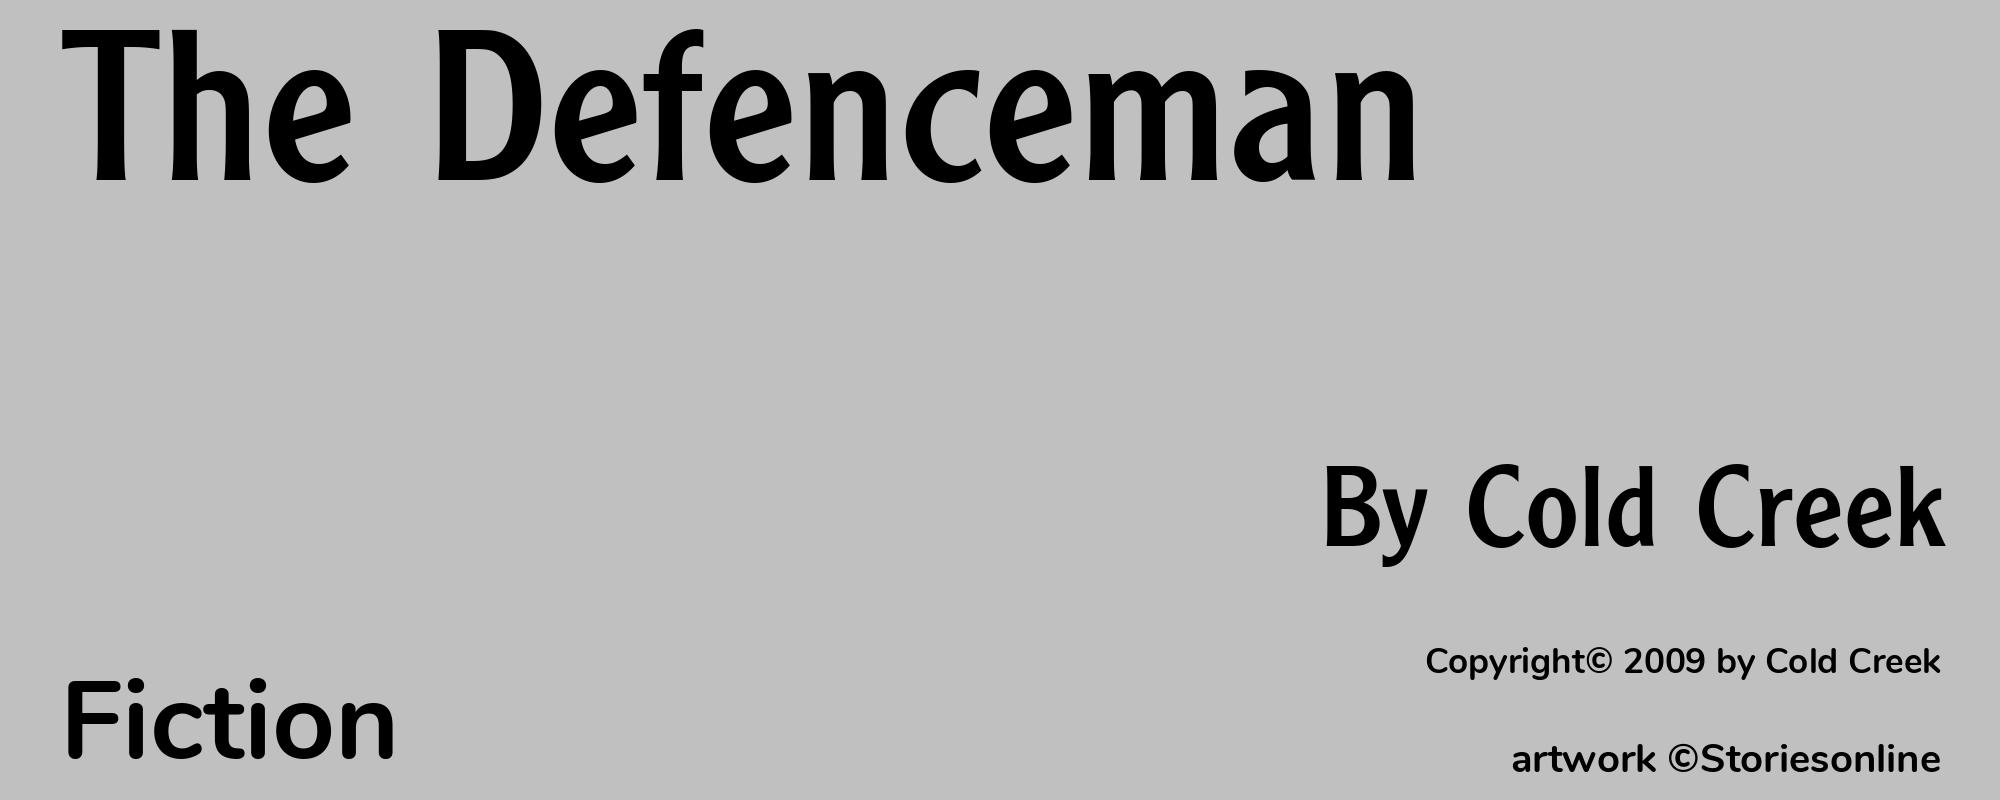 The Defenceman - Cover